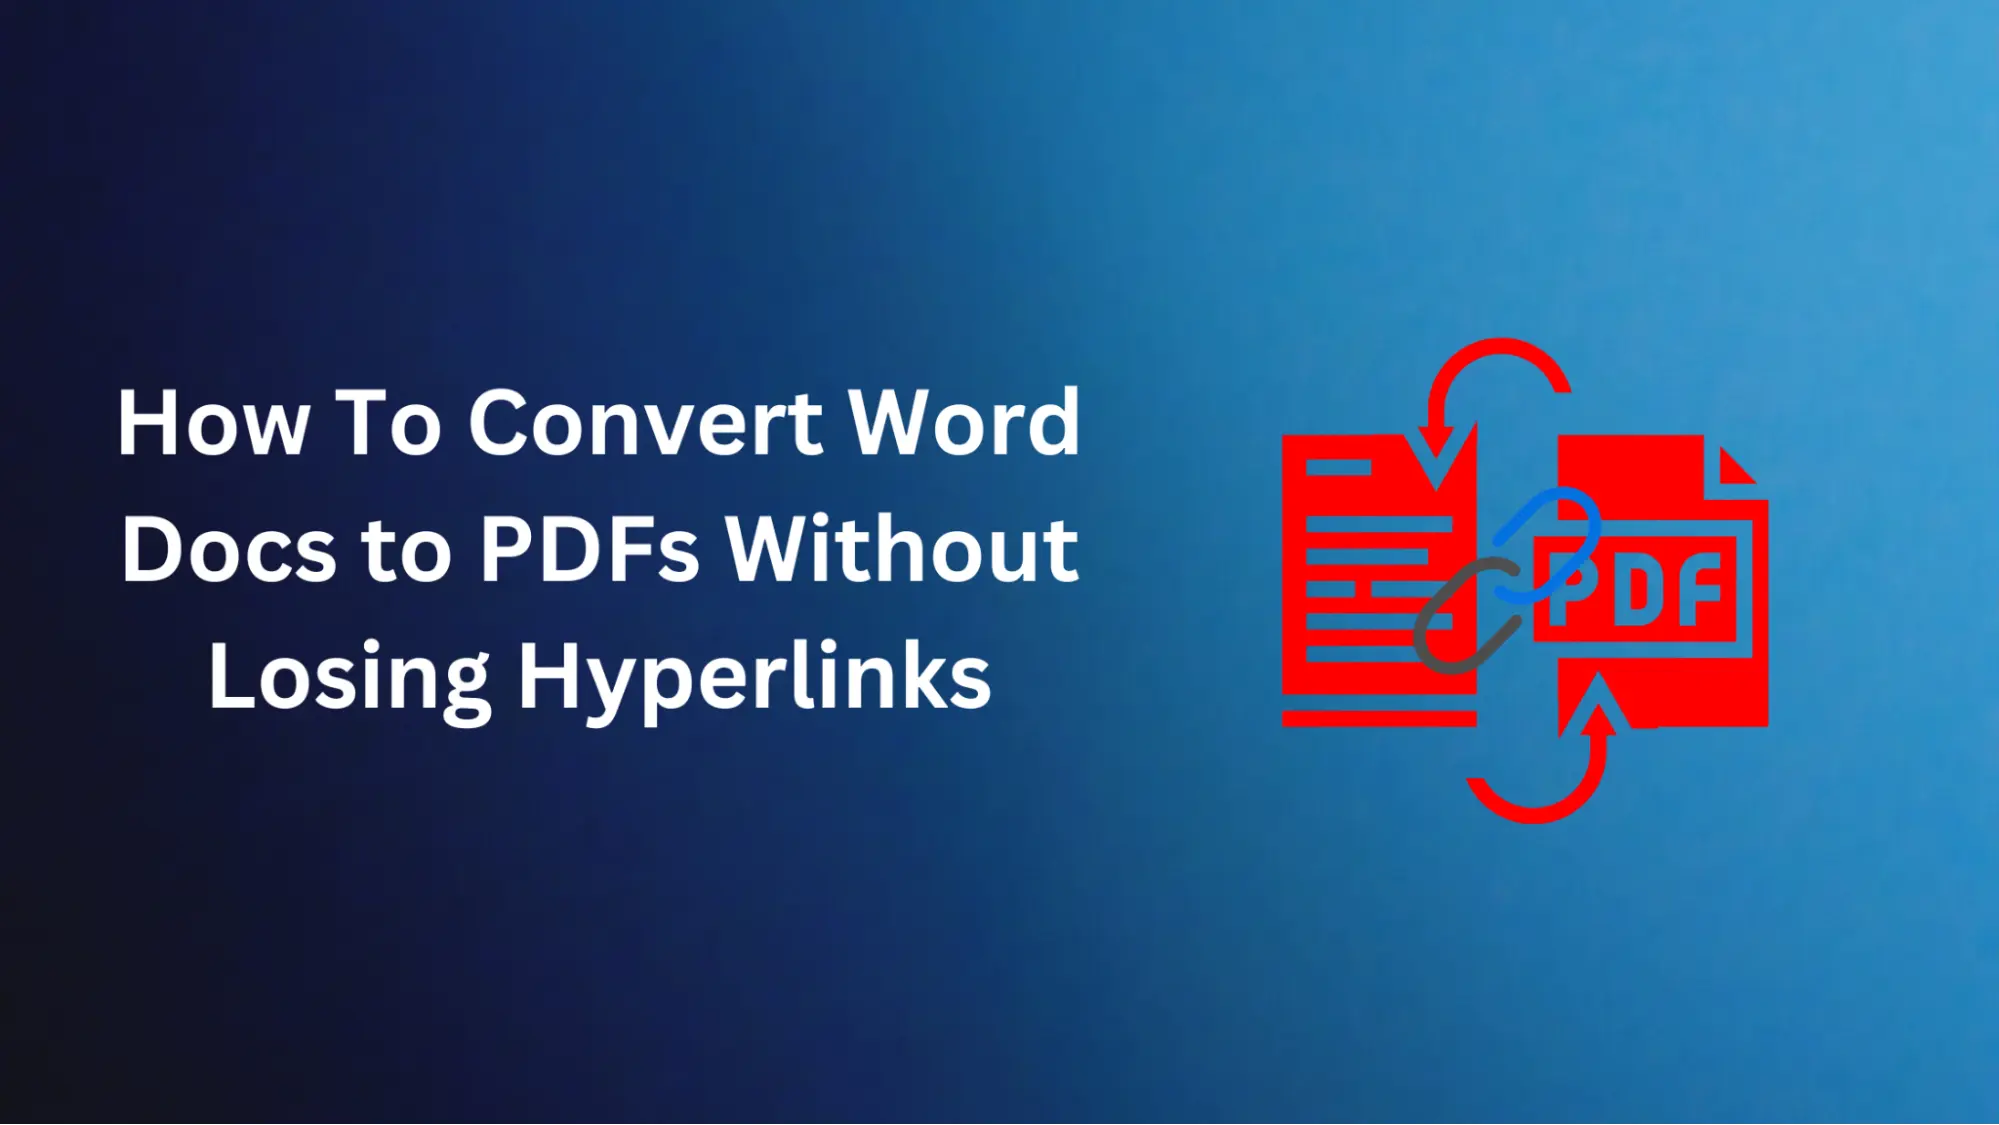 How To Convert Word Docs to PDFs Without Losing Hyperlinks